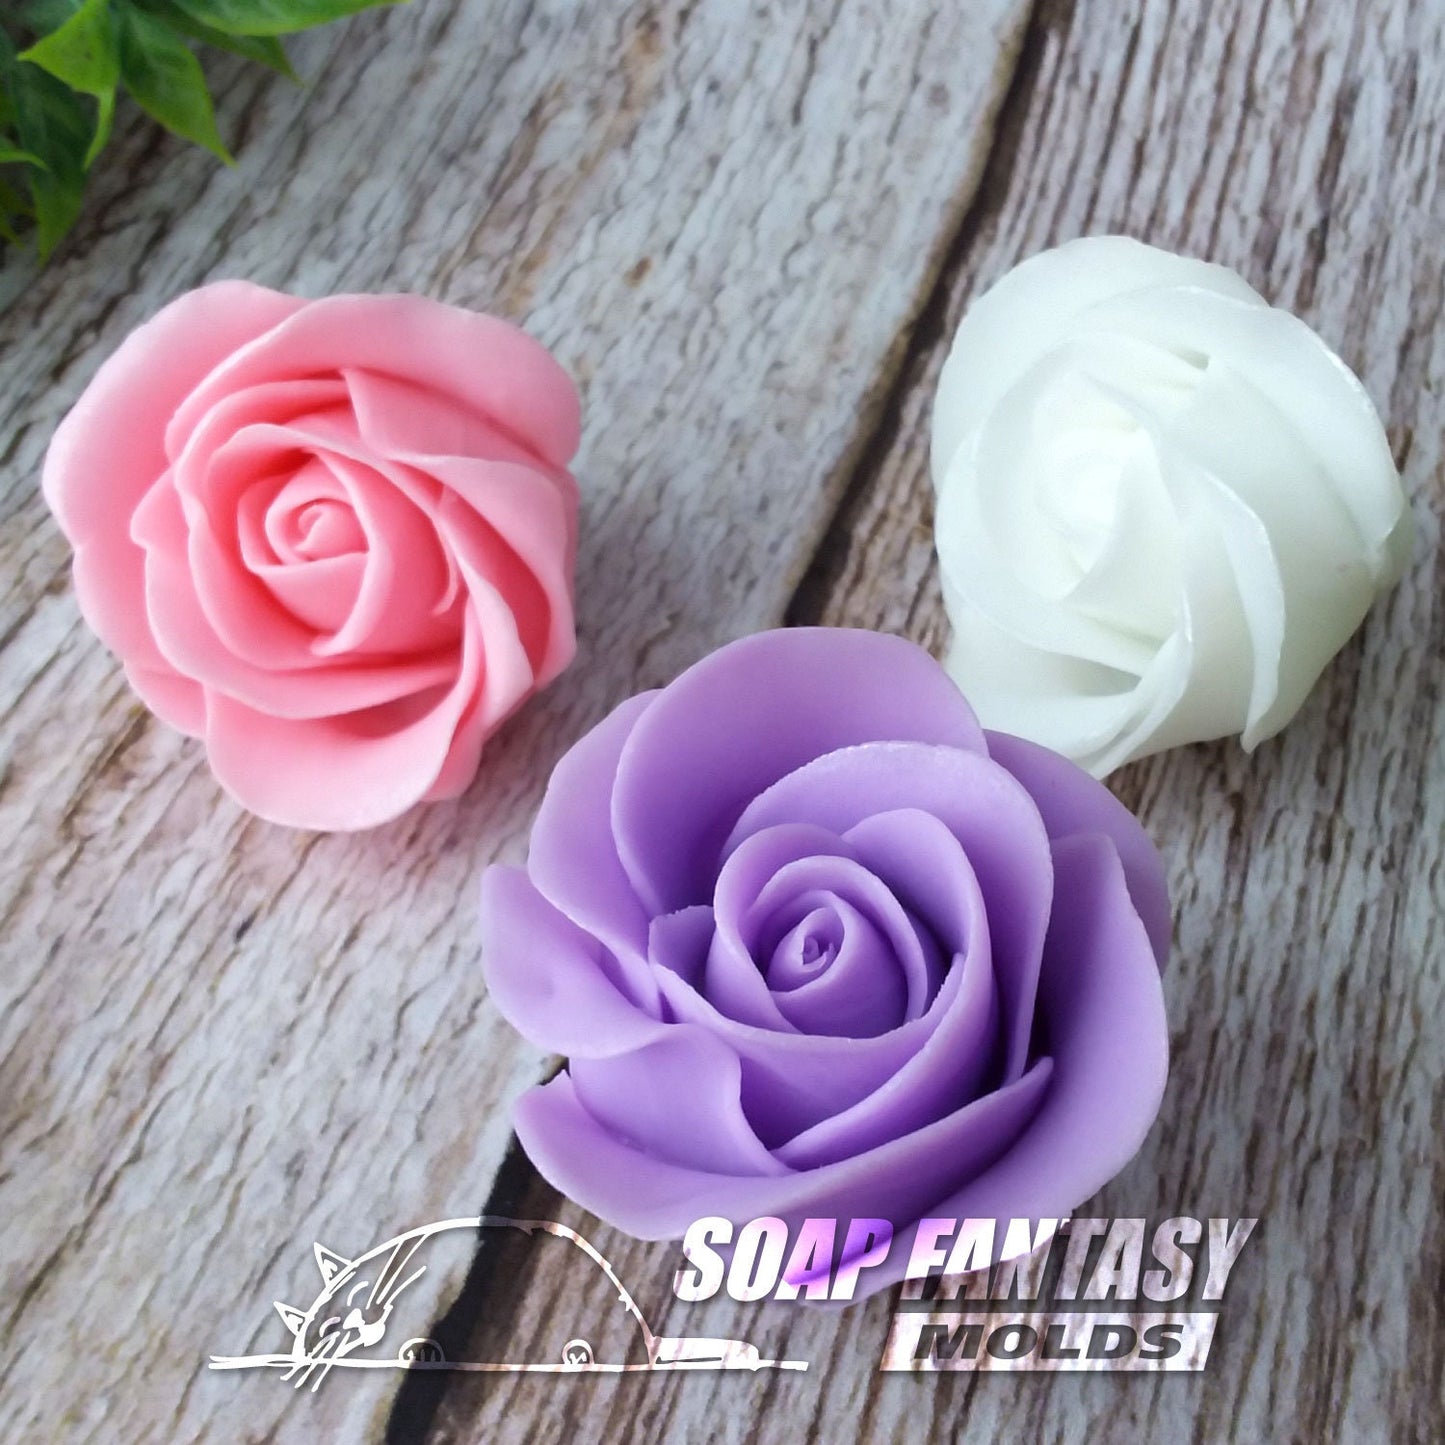 Thin Rose #1 (with thin petals) silicone mold for soap making